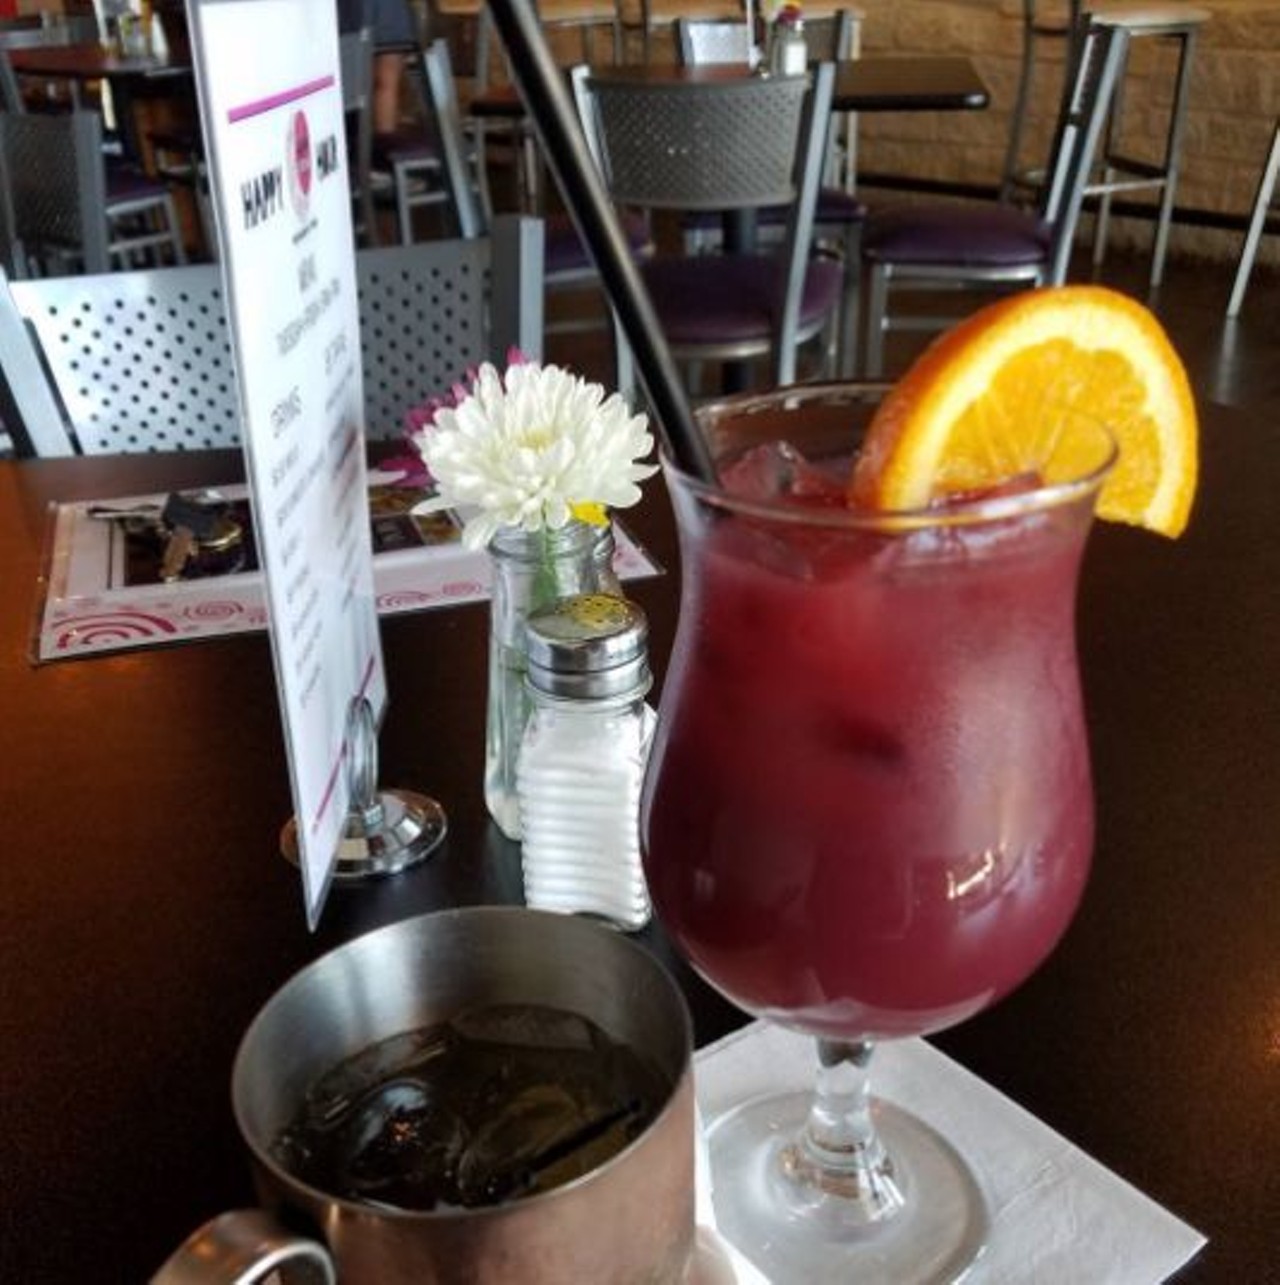 Luna Rosa Puerto Rican Grill y Tapas
2603 SE Military Drive #106, (210) 314-3111
For savory Puerto Rican food and large sangrias you&#146;re sure to love, head to Luna Rosa.
Photo via Instagram, bonnielee71